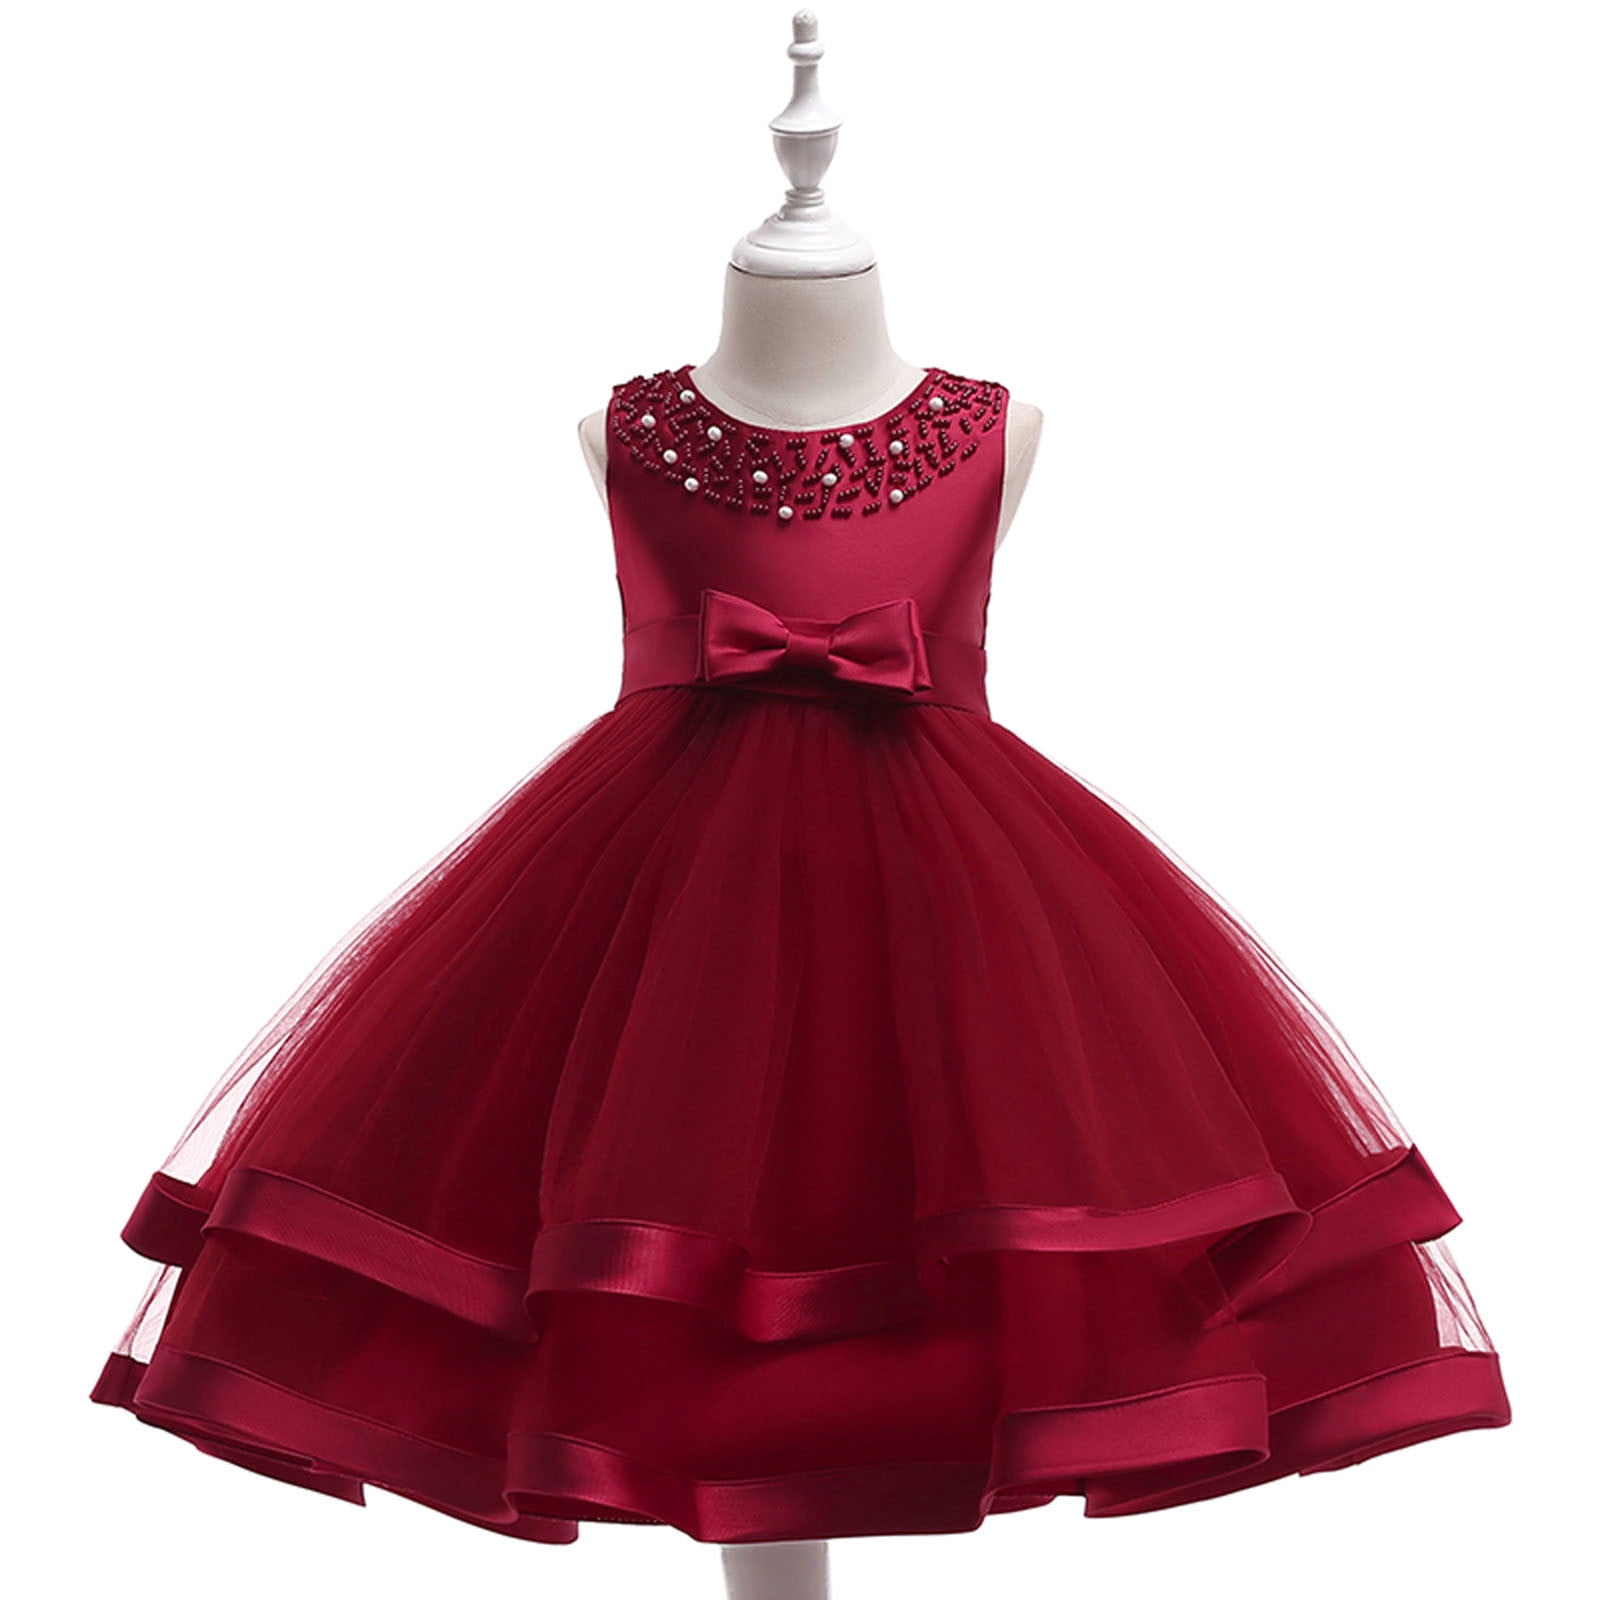 Gowns for Girls - Buy Indian Kids Gown Online | Party Gown for Kids